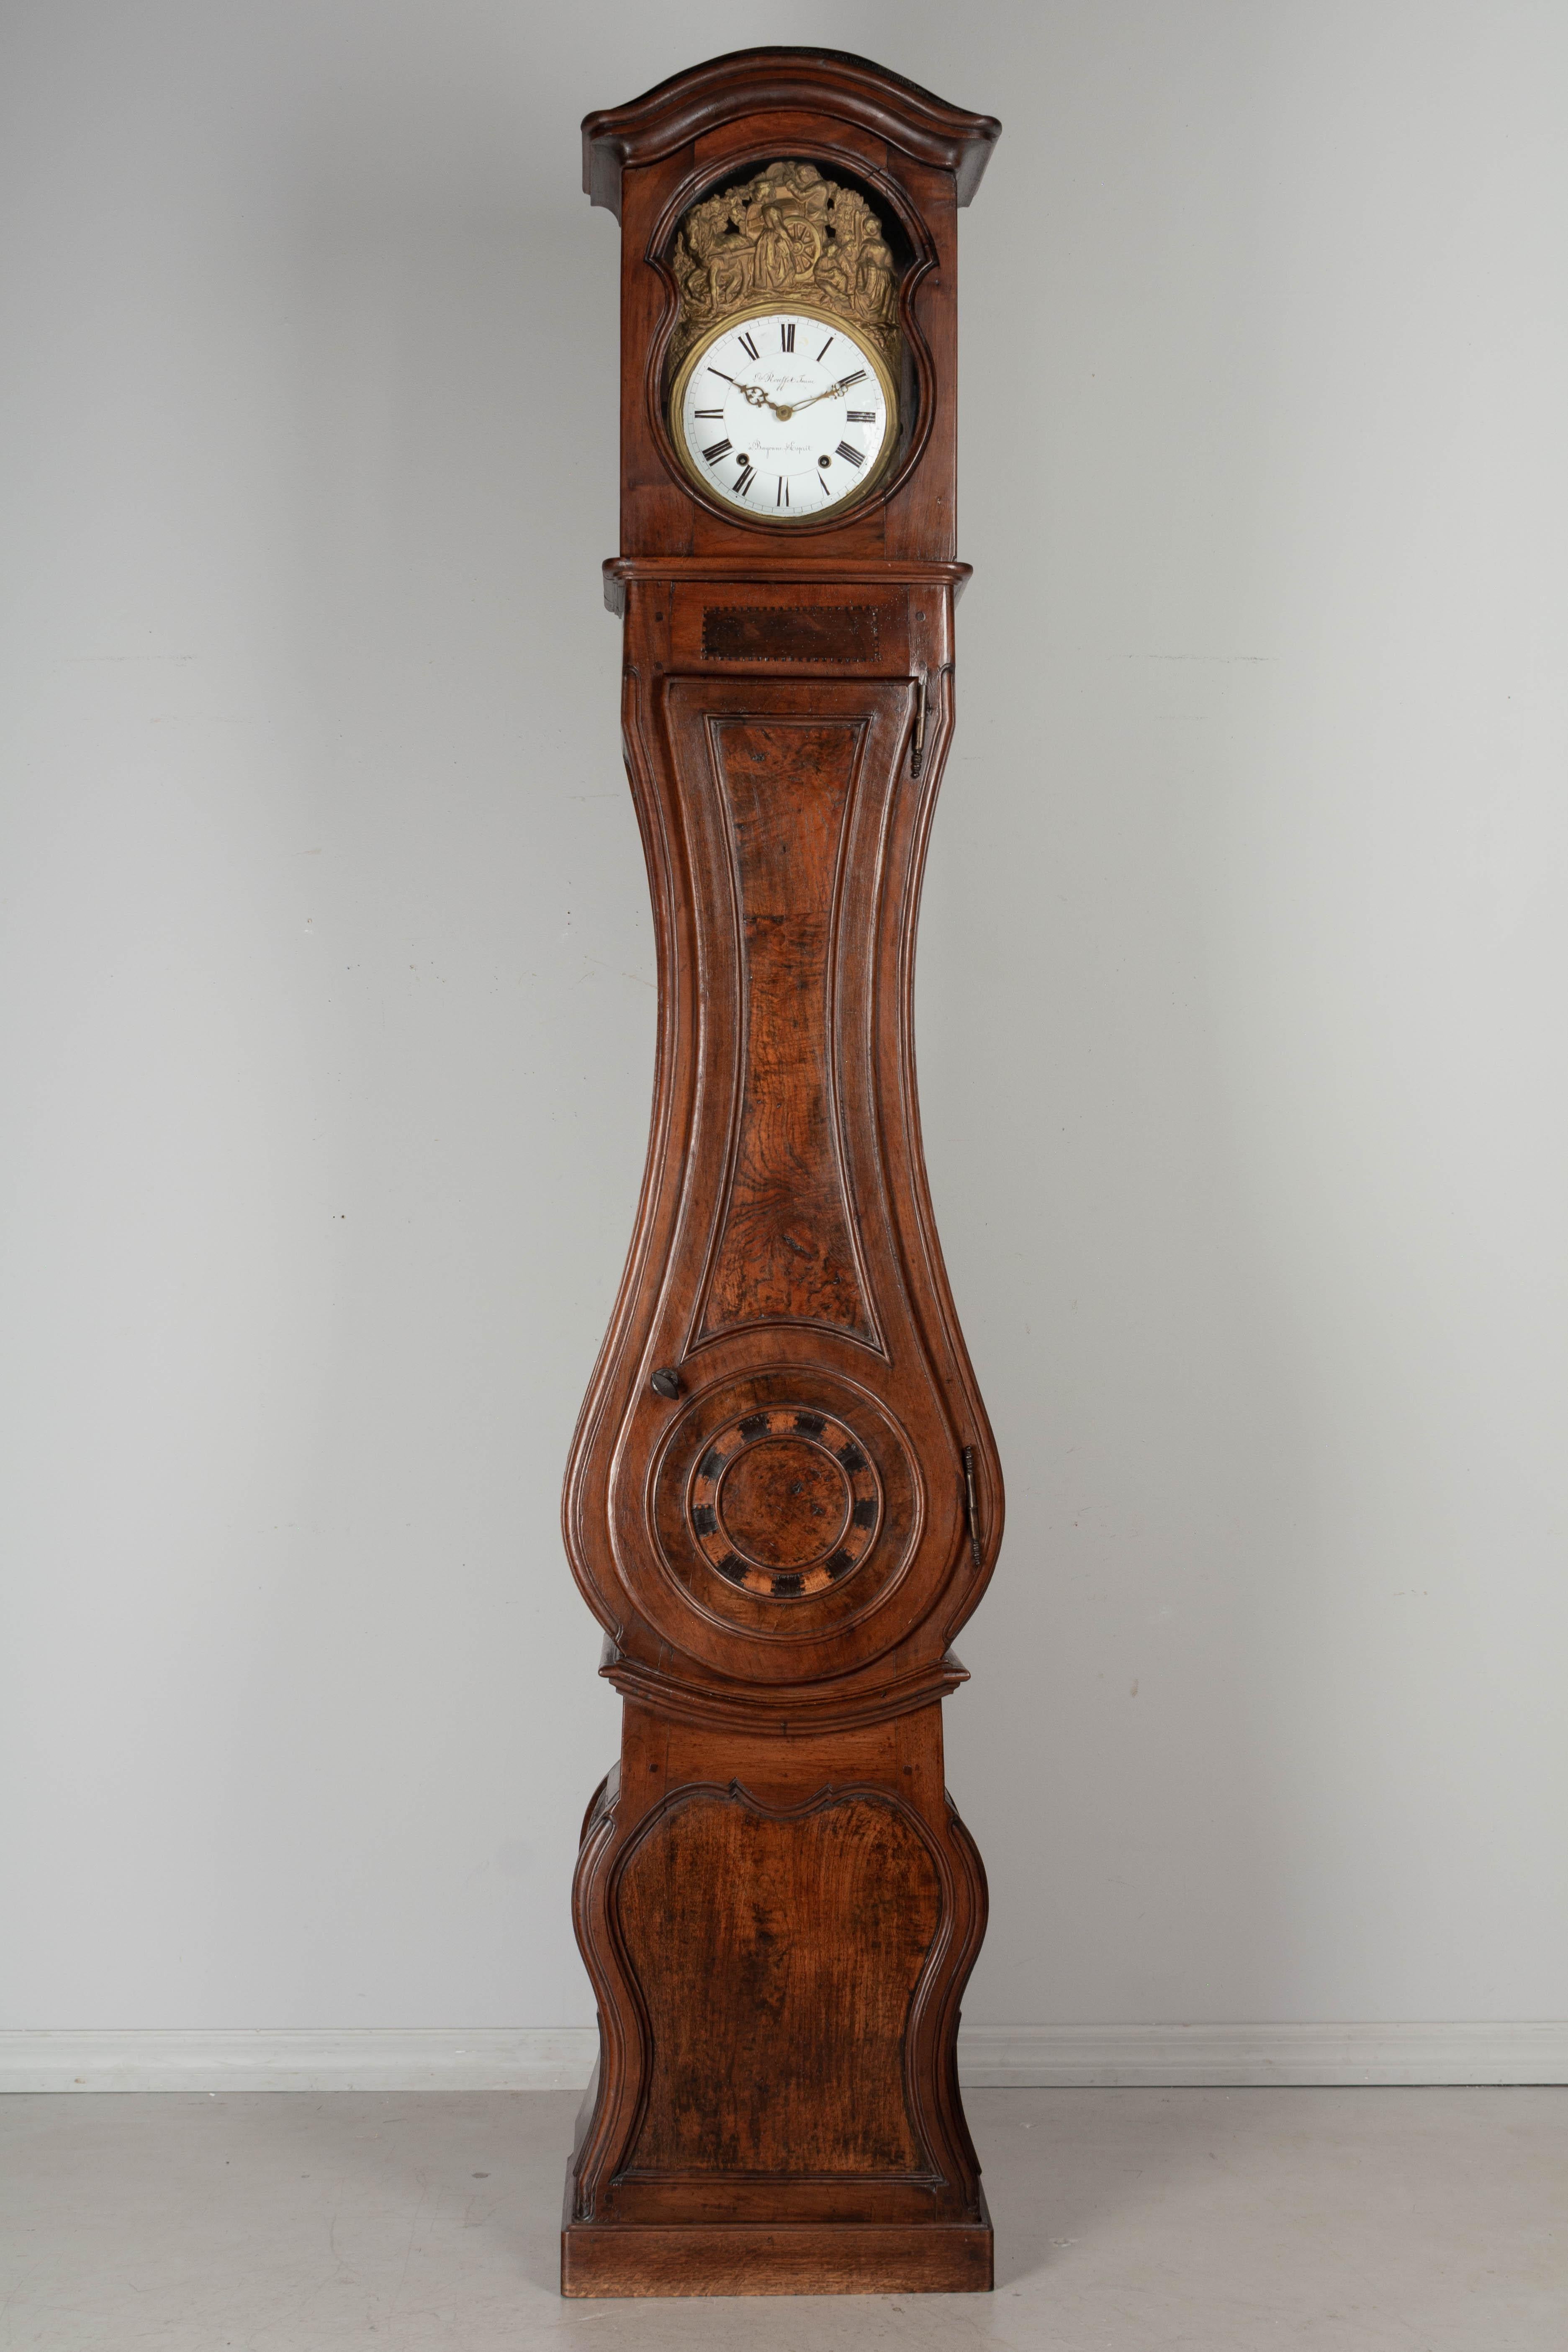 A 19th century French Horloge De Parquet, or tall case clock, from Burgundy. The case is made of solid walnut with marquetry inlay details. In two parts with a curved shaped body, paneled sides and a chapeau de gendarme crown. Original glass panes.